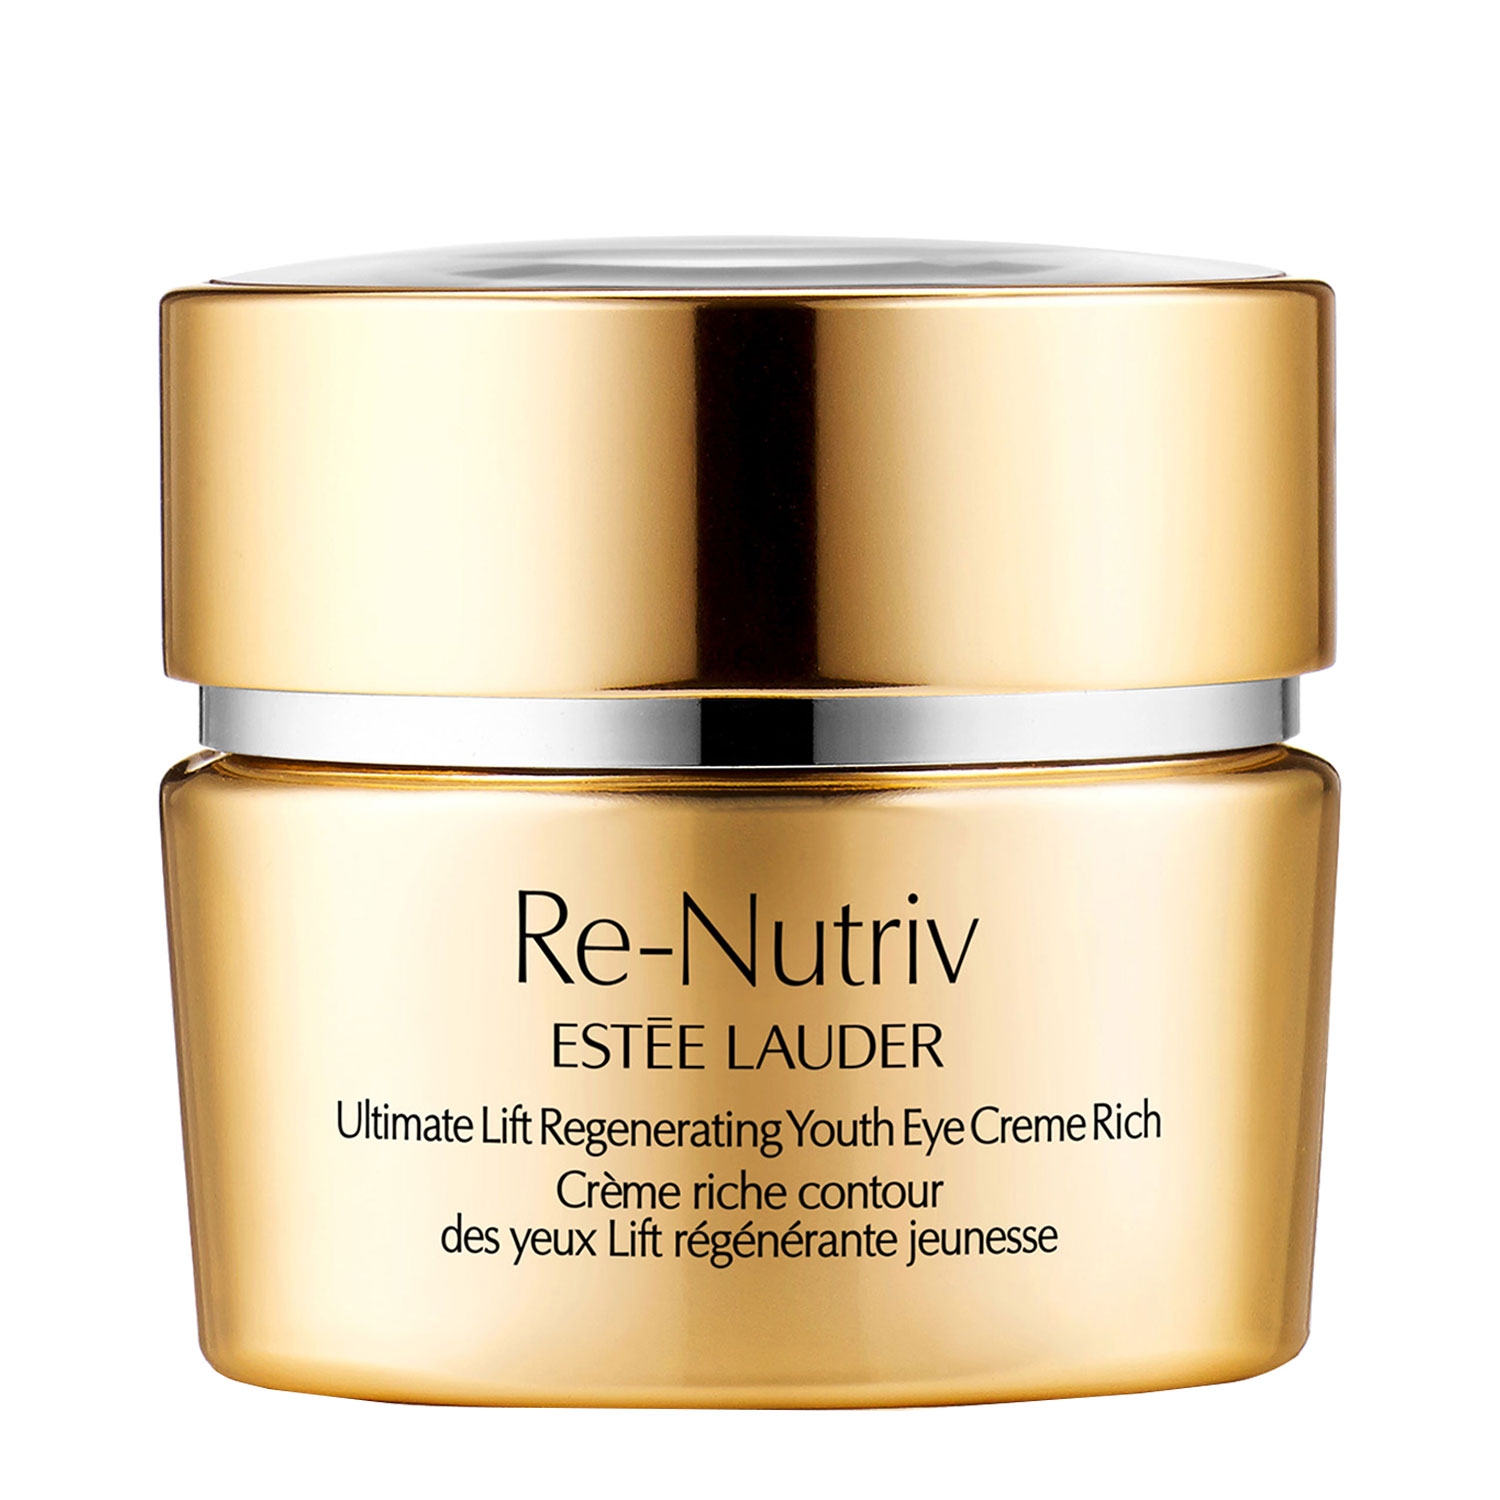 Product image from Re-Nutriv - Ultimate Lift Regenerating Youth Eye Creme Rich